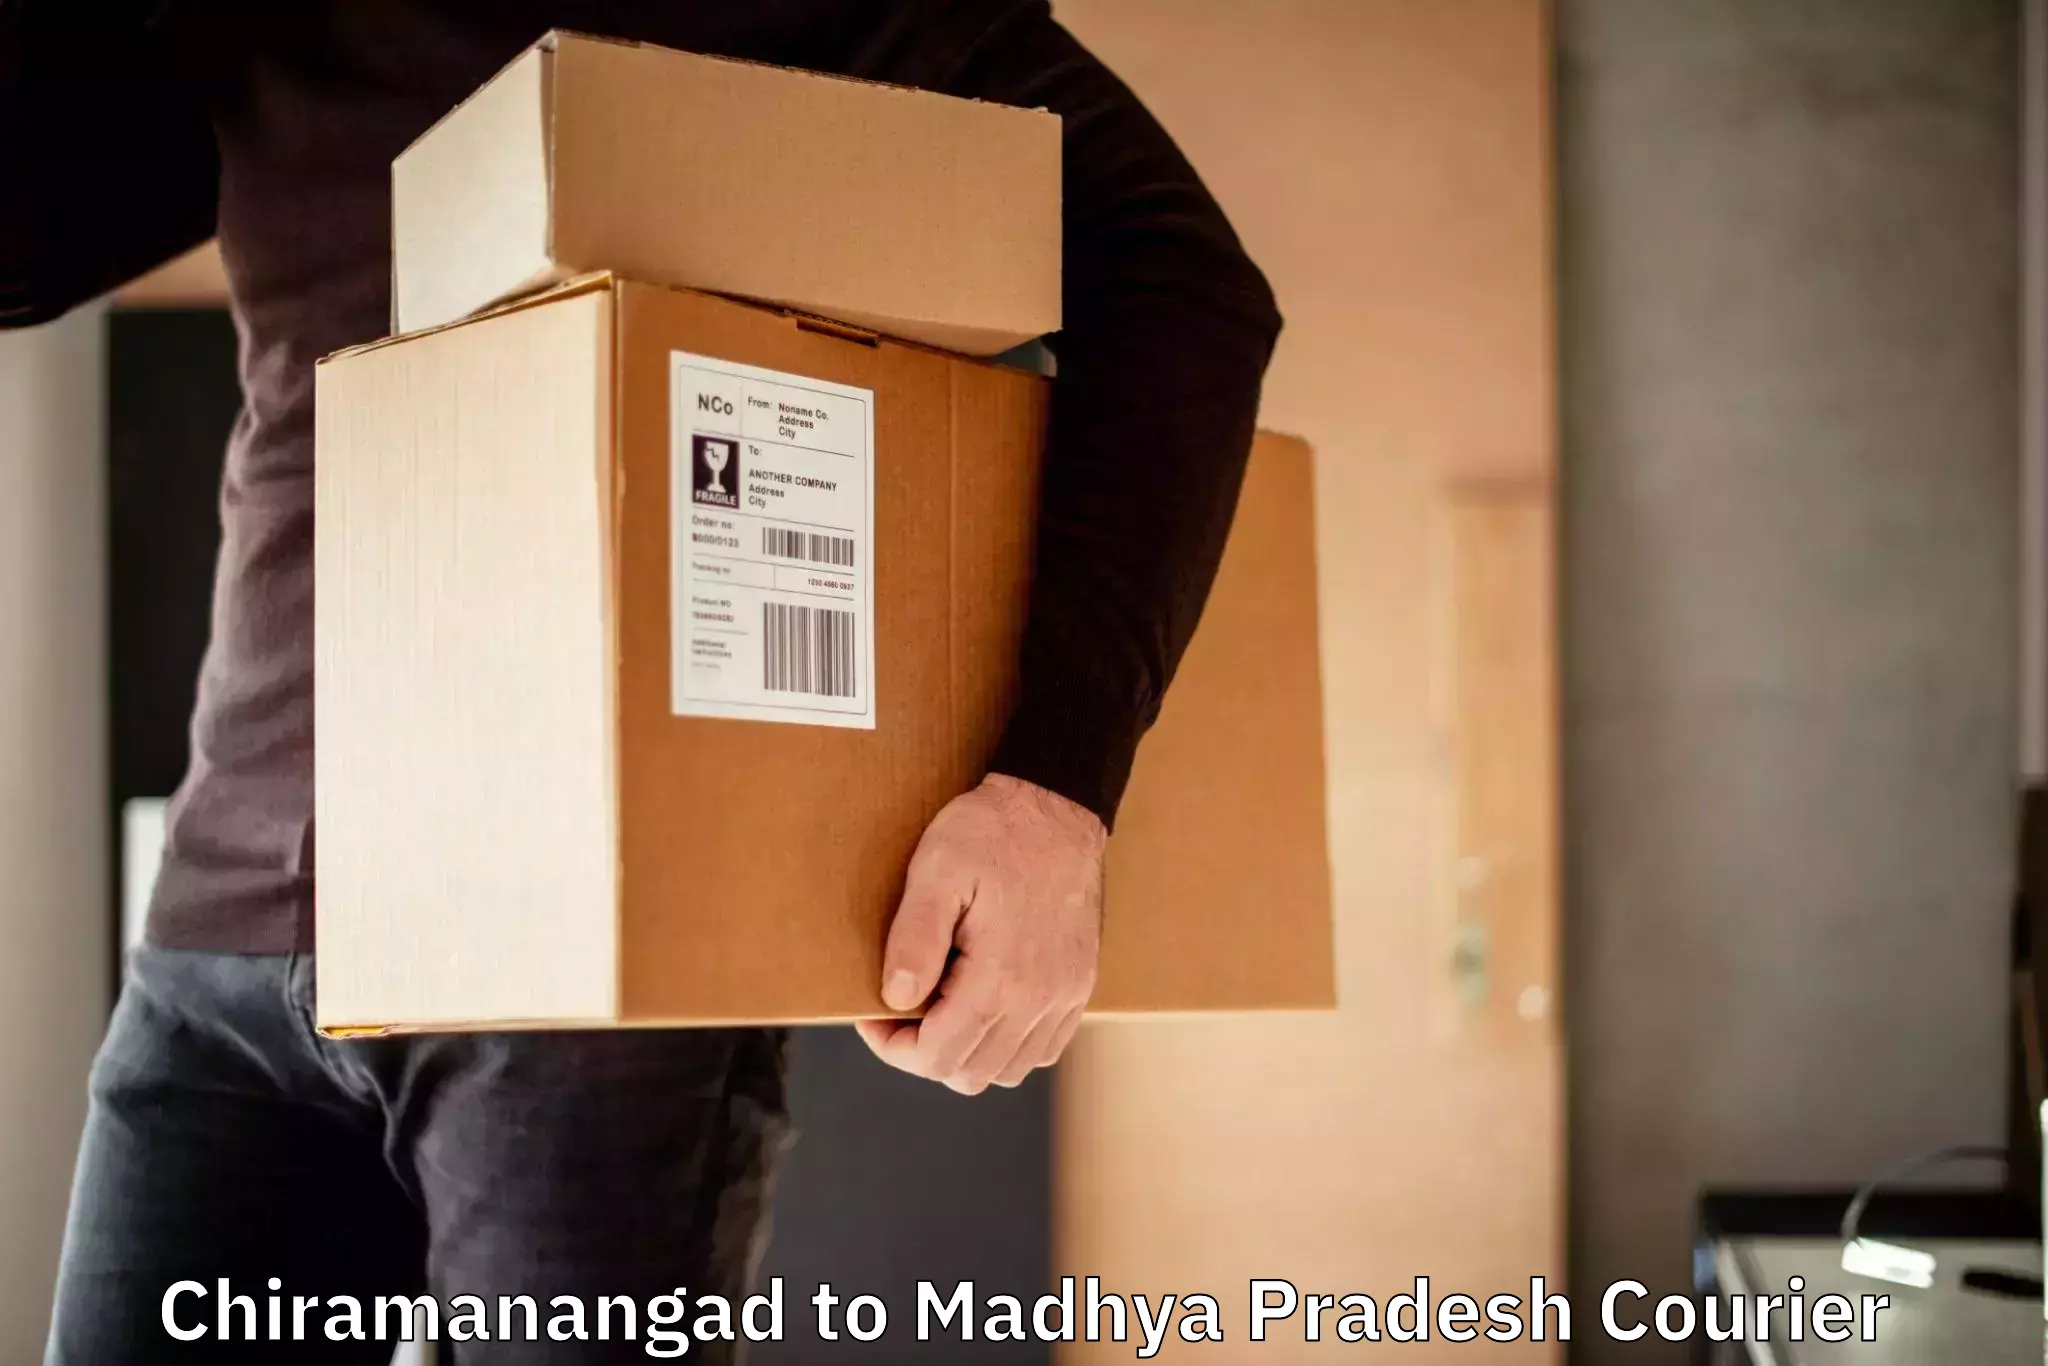 Professional courier services Chiramanangad to Bajag